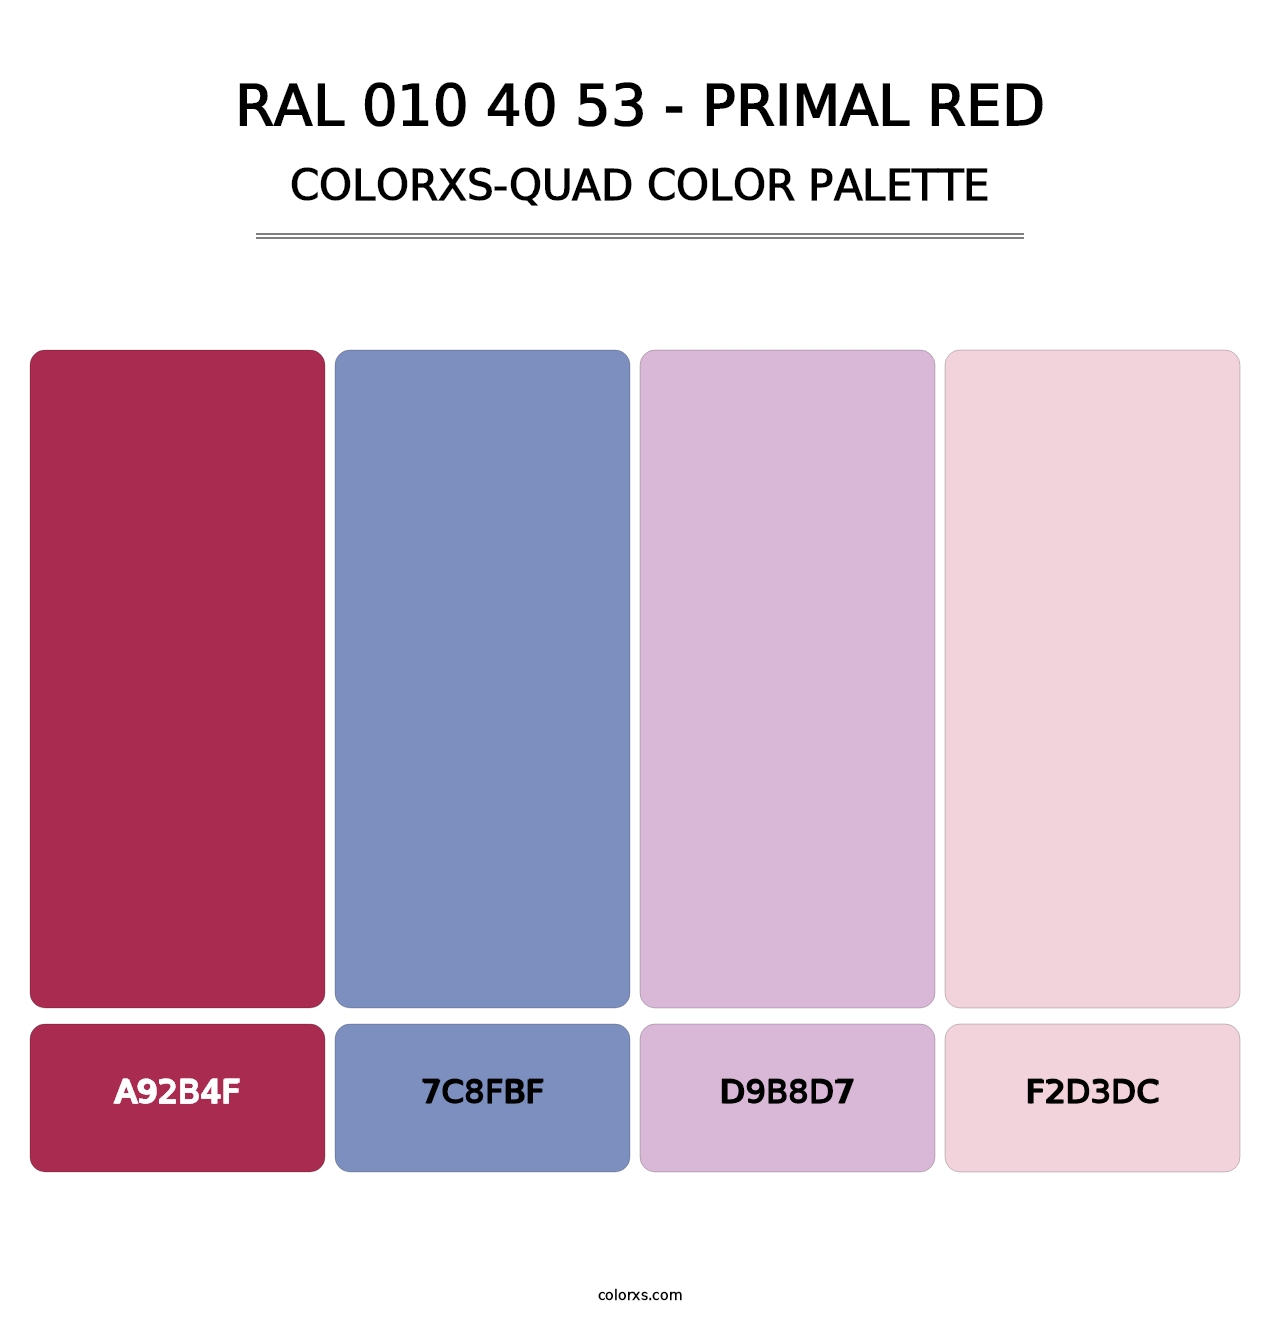 RAL 010 40 53 - Primal Red - Colorxs Quad Palette